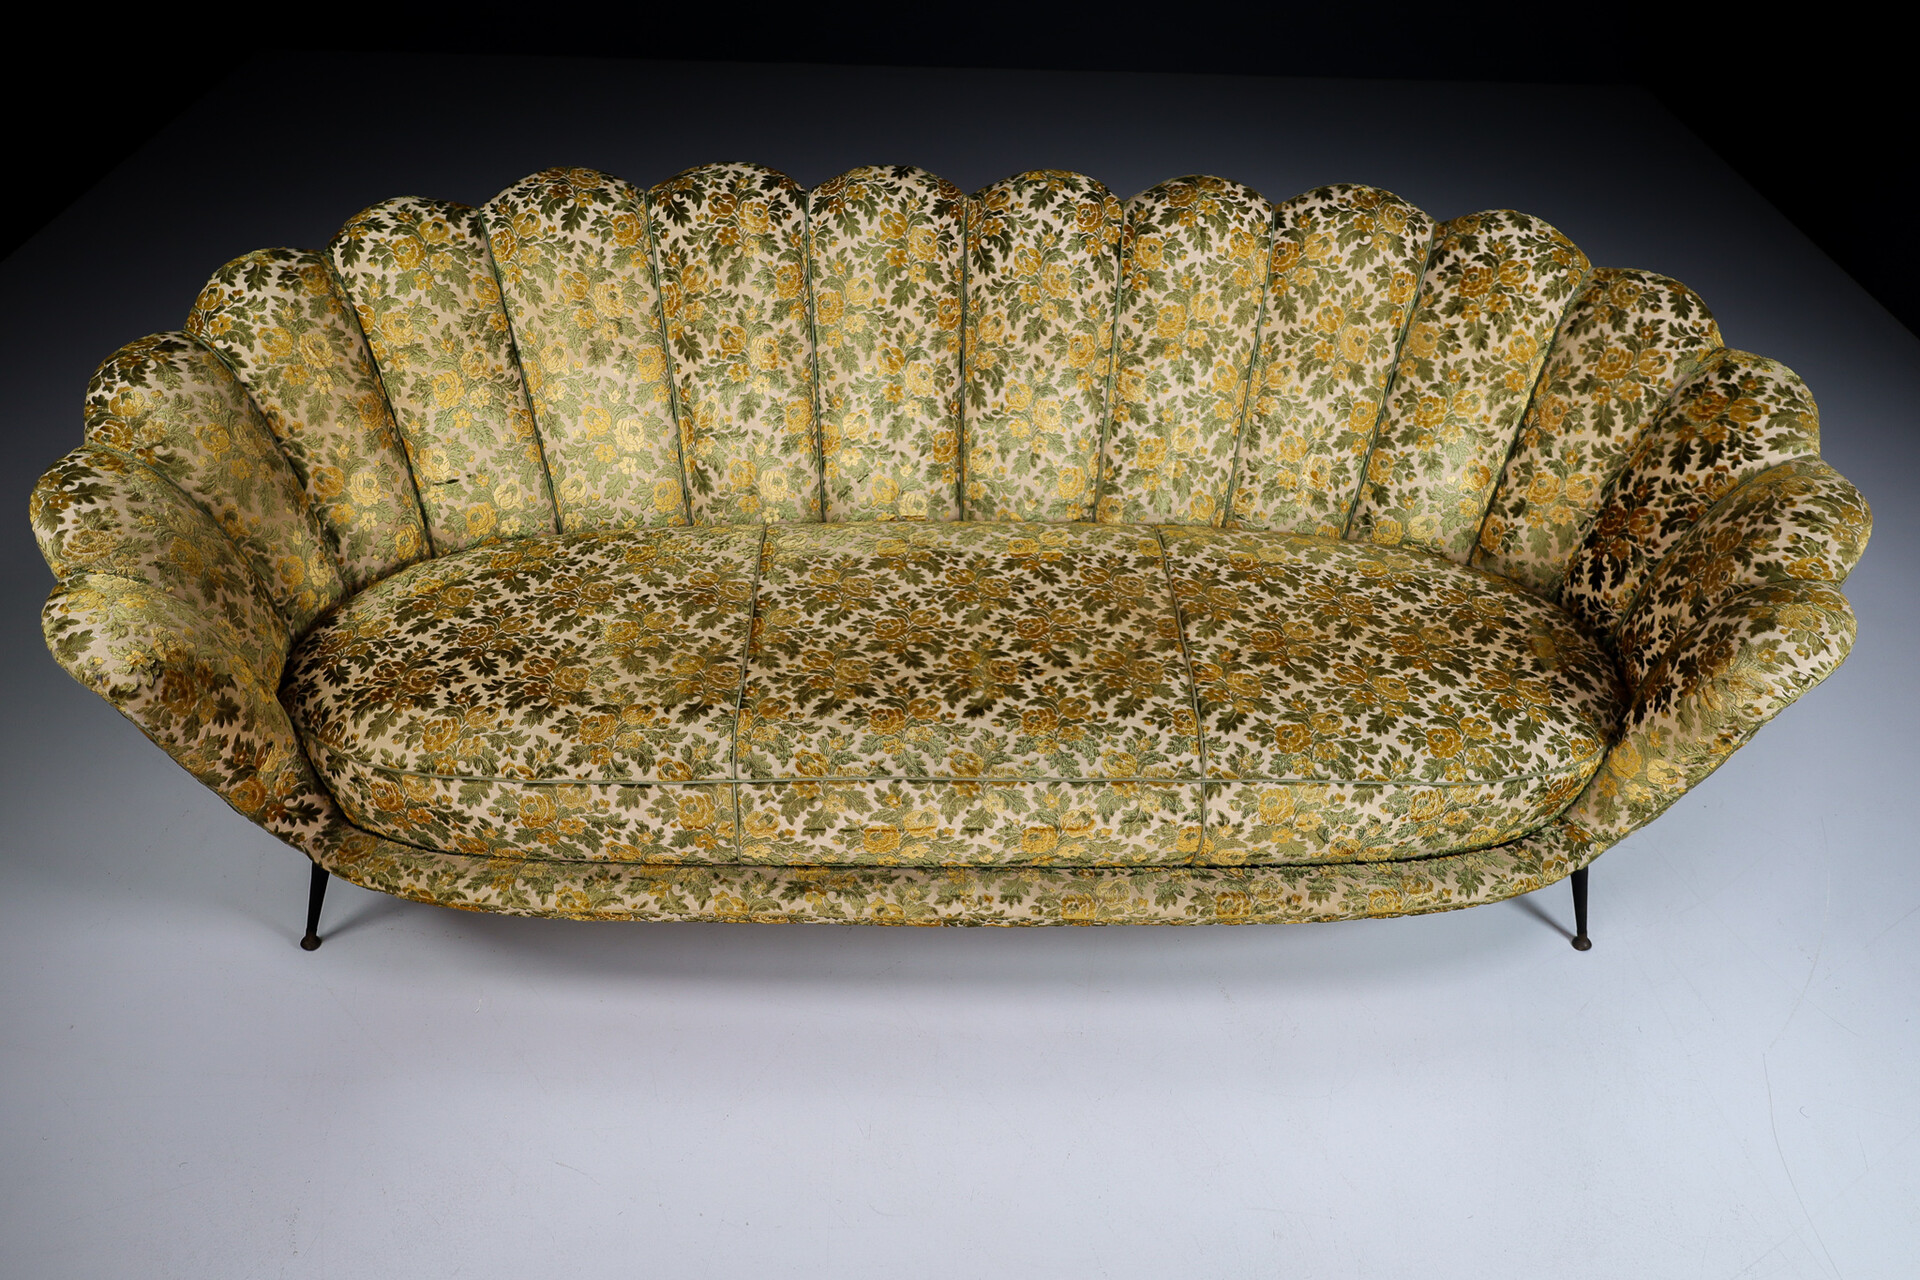 Mid century modern Elegant Fan Curved Lounge sofa In Original Floral Upholstery, Italy 1950s Mid-20th century